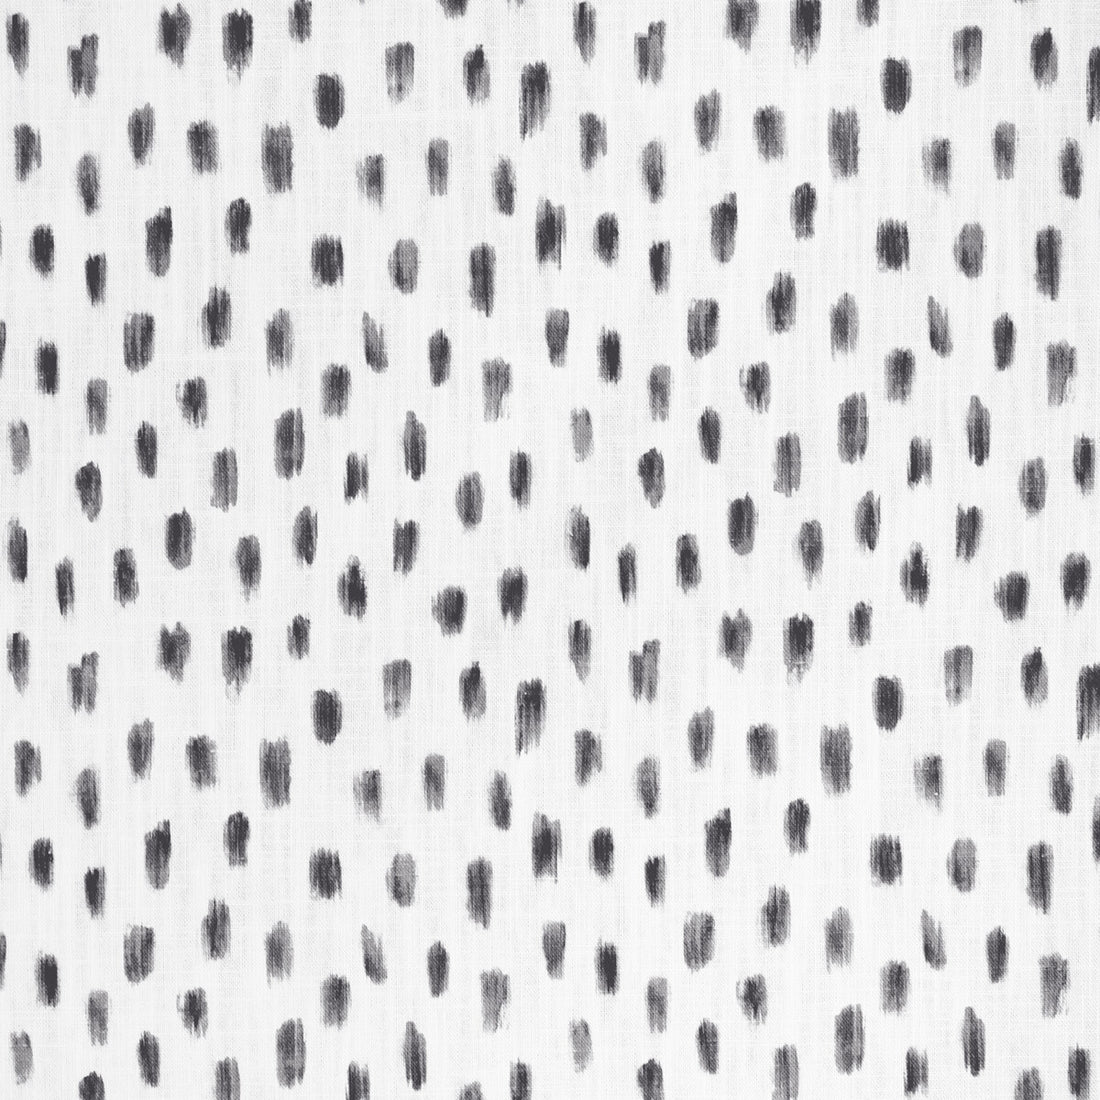 Brush Off fabric in charcoal color - pattern BRUSH OFF.121.0 - by Kravet Basics in the Small Scale Prints collection